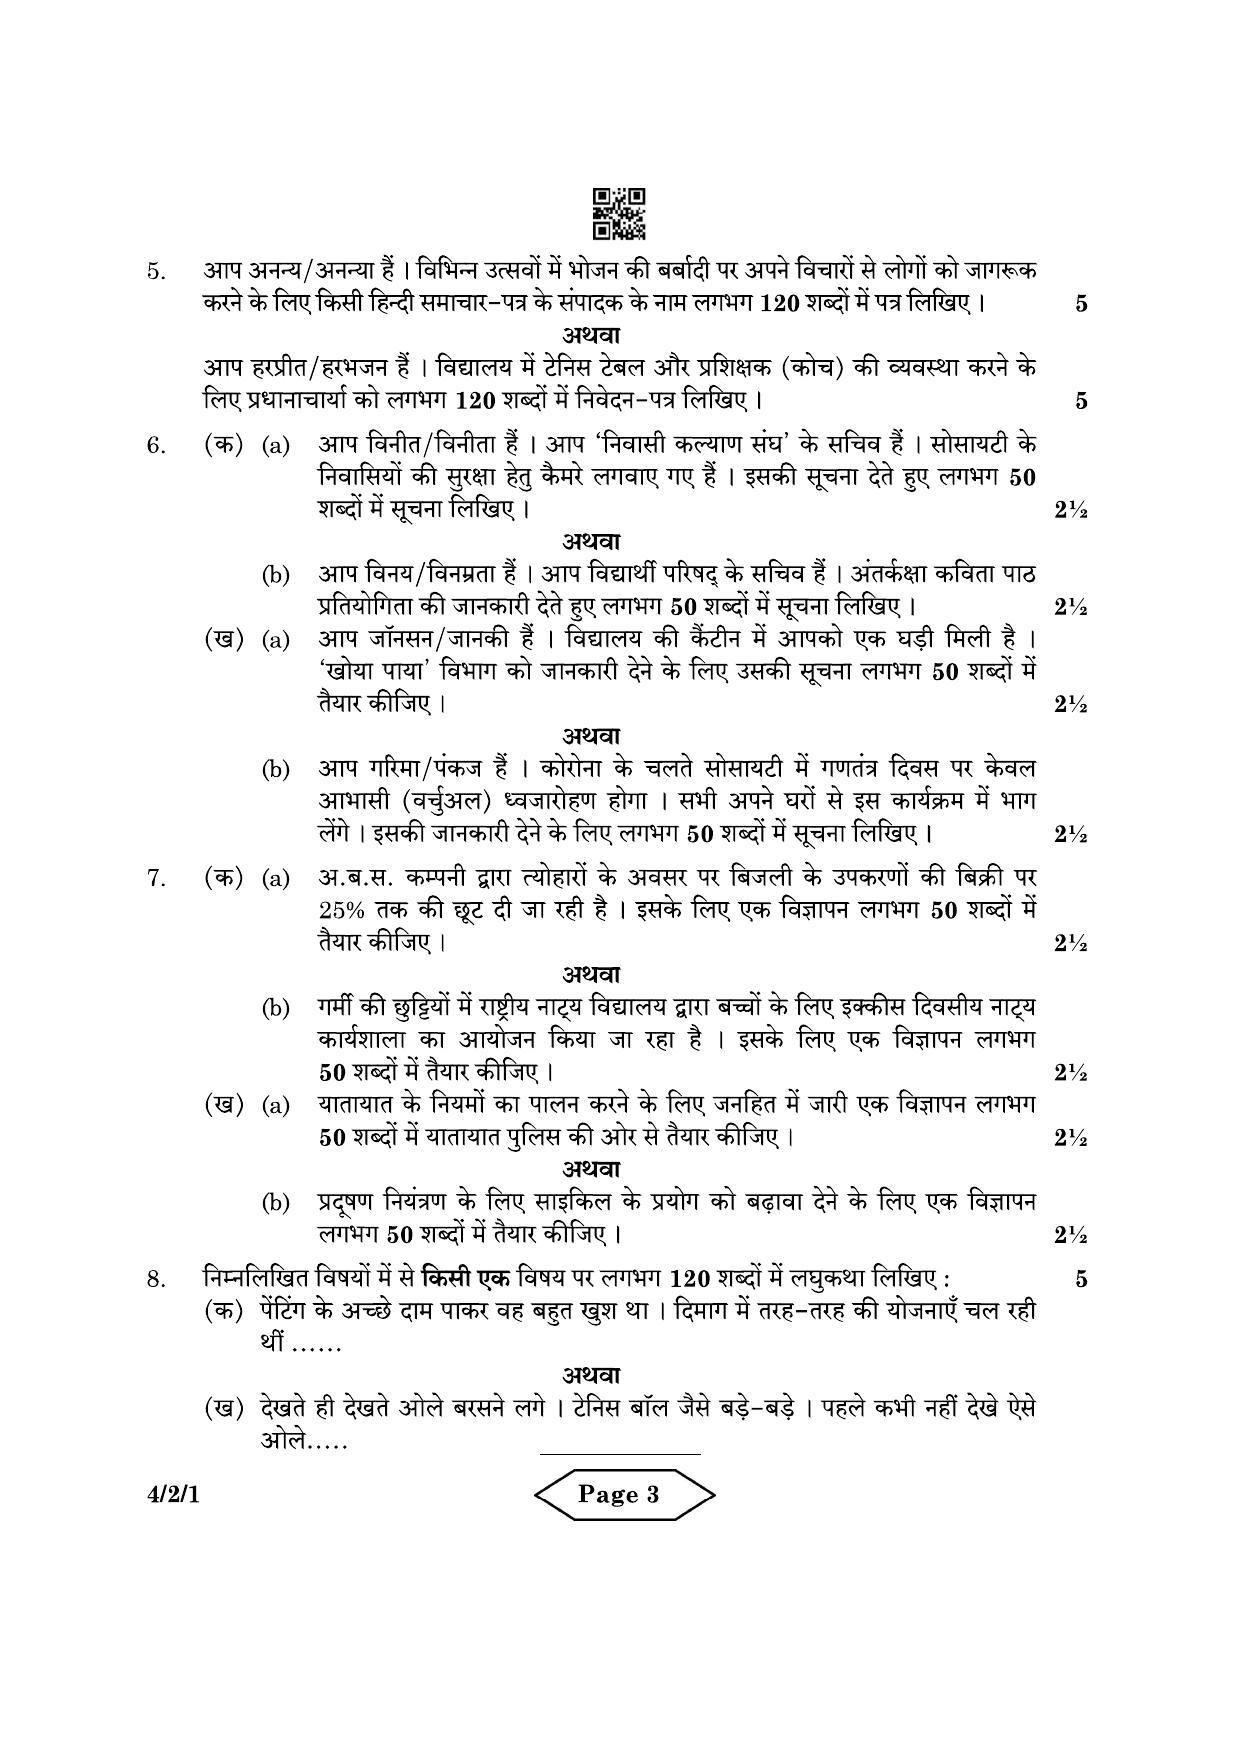 CBSE Class 10 4-2-1 Hindi B 2022 Question Paper - Page 3